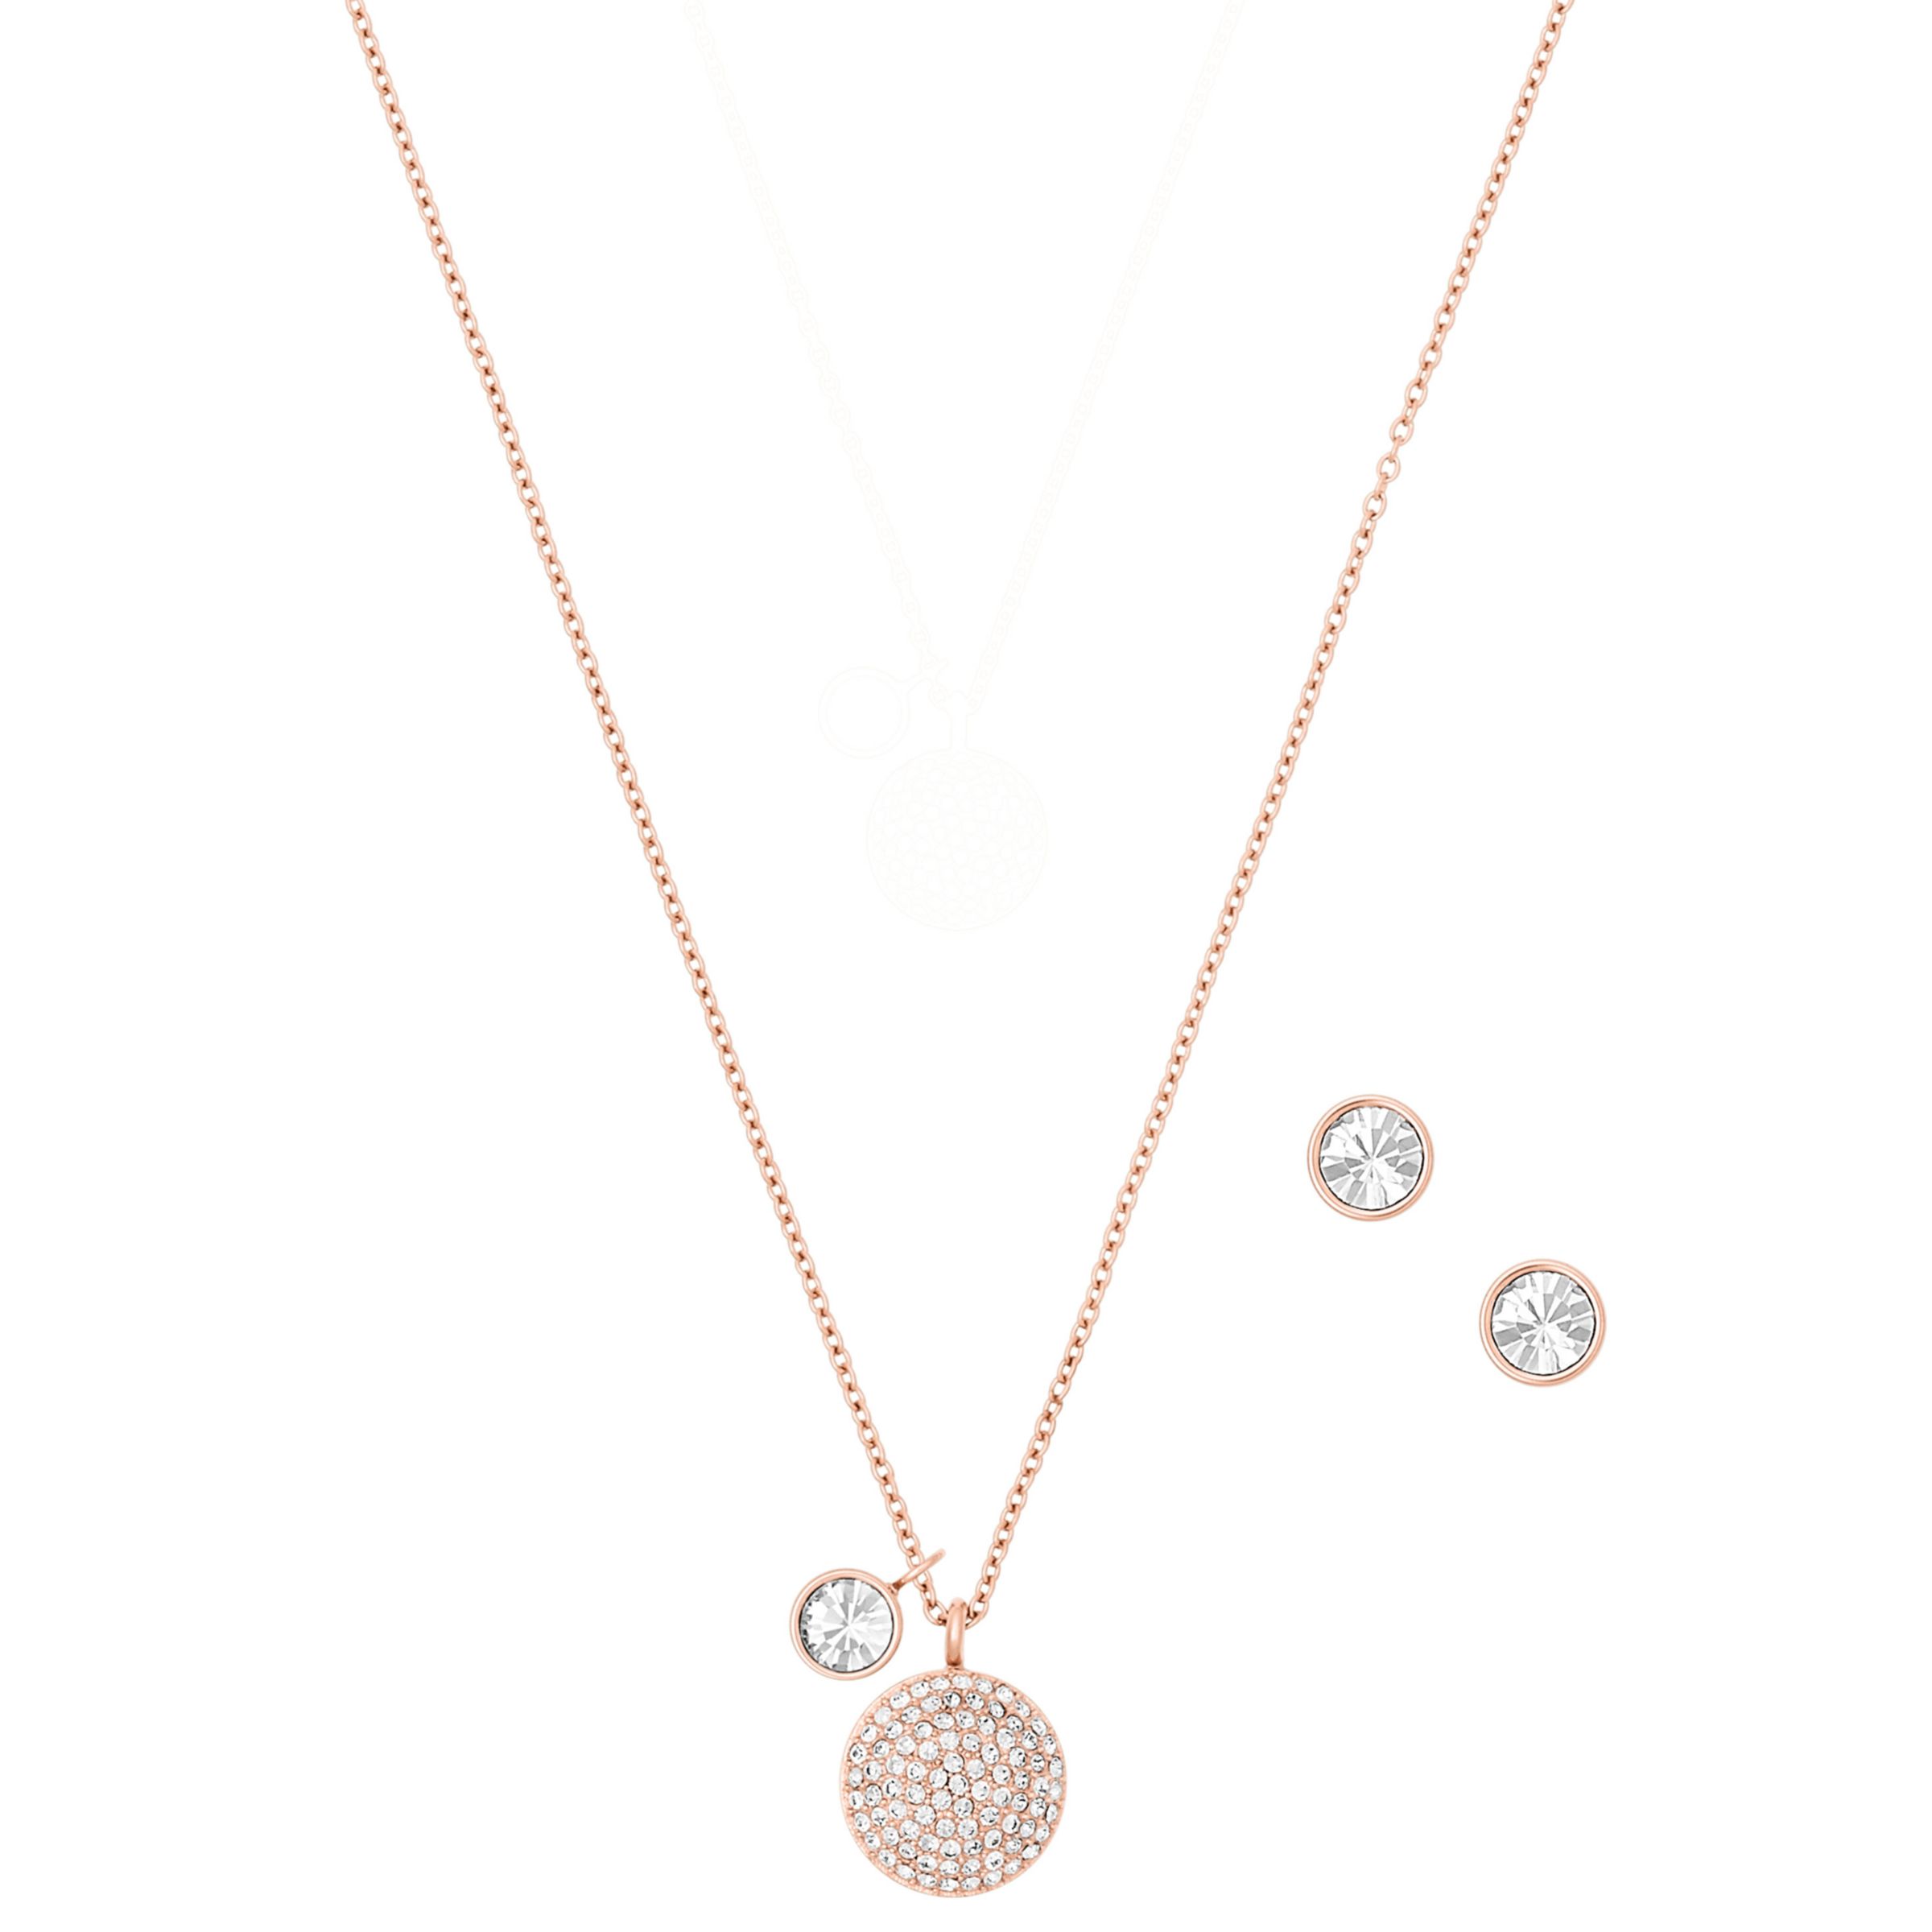 michael kors earrings and necklace set